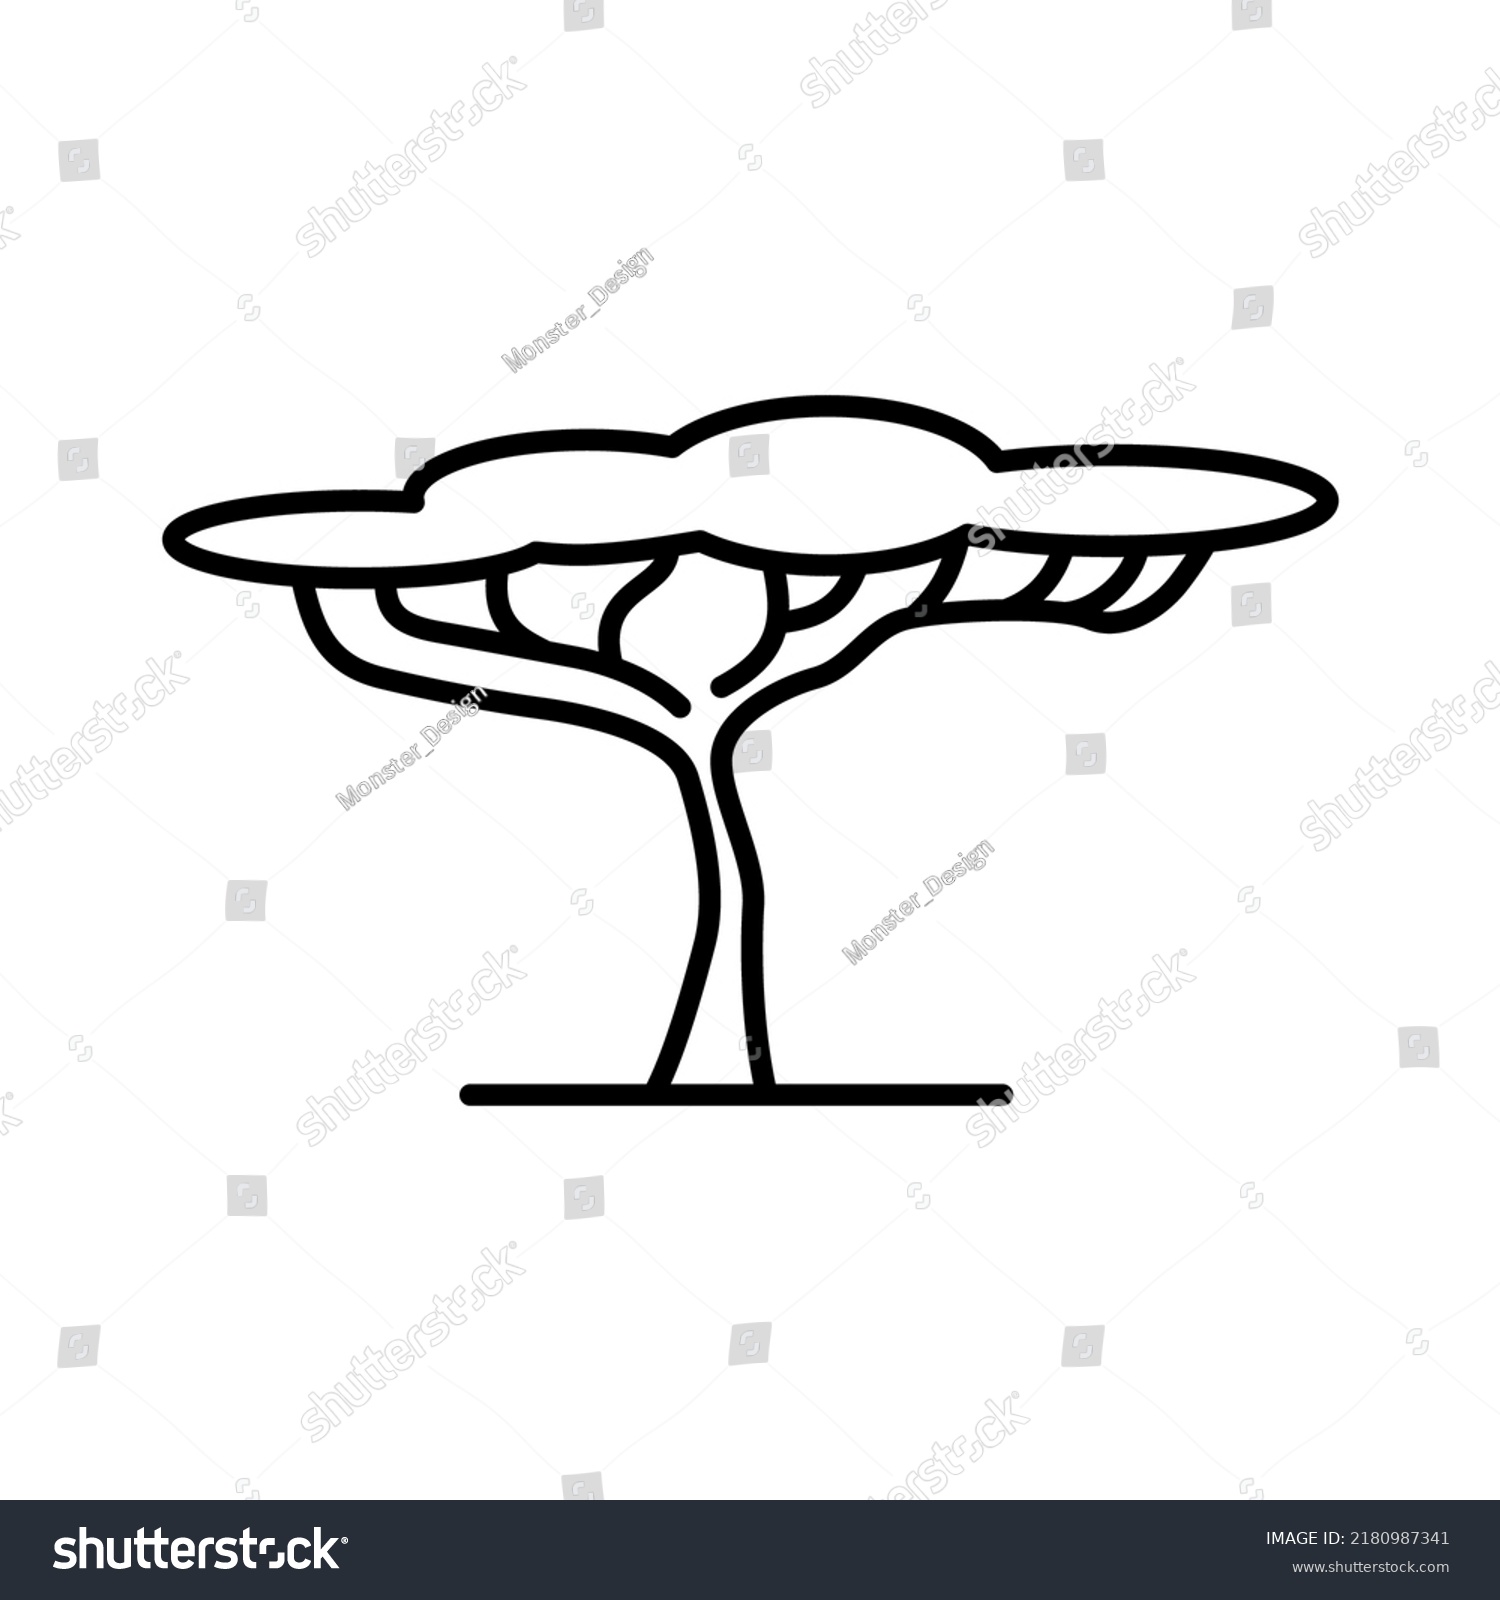 SVG of African tree icon - editable stroke svg